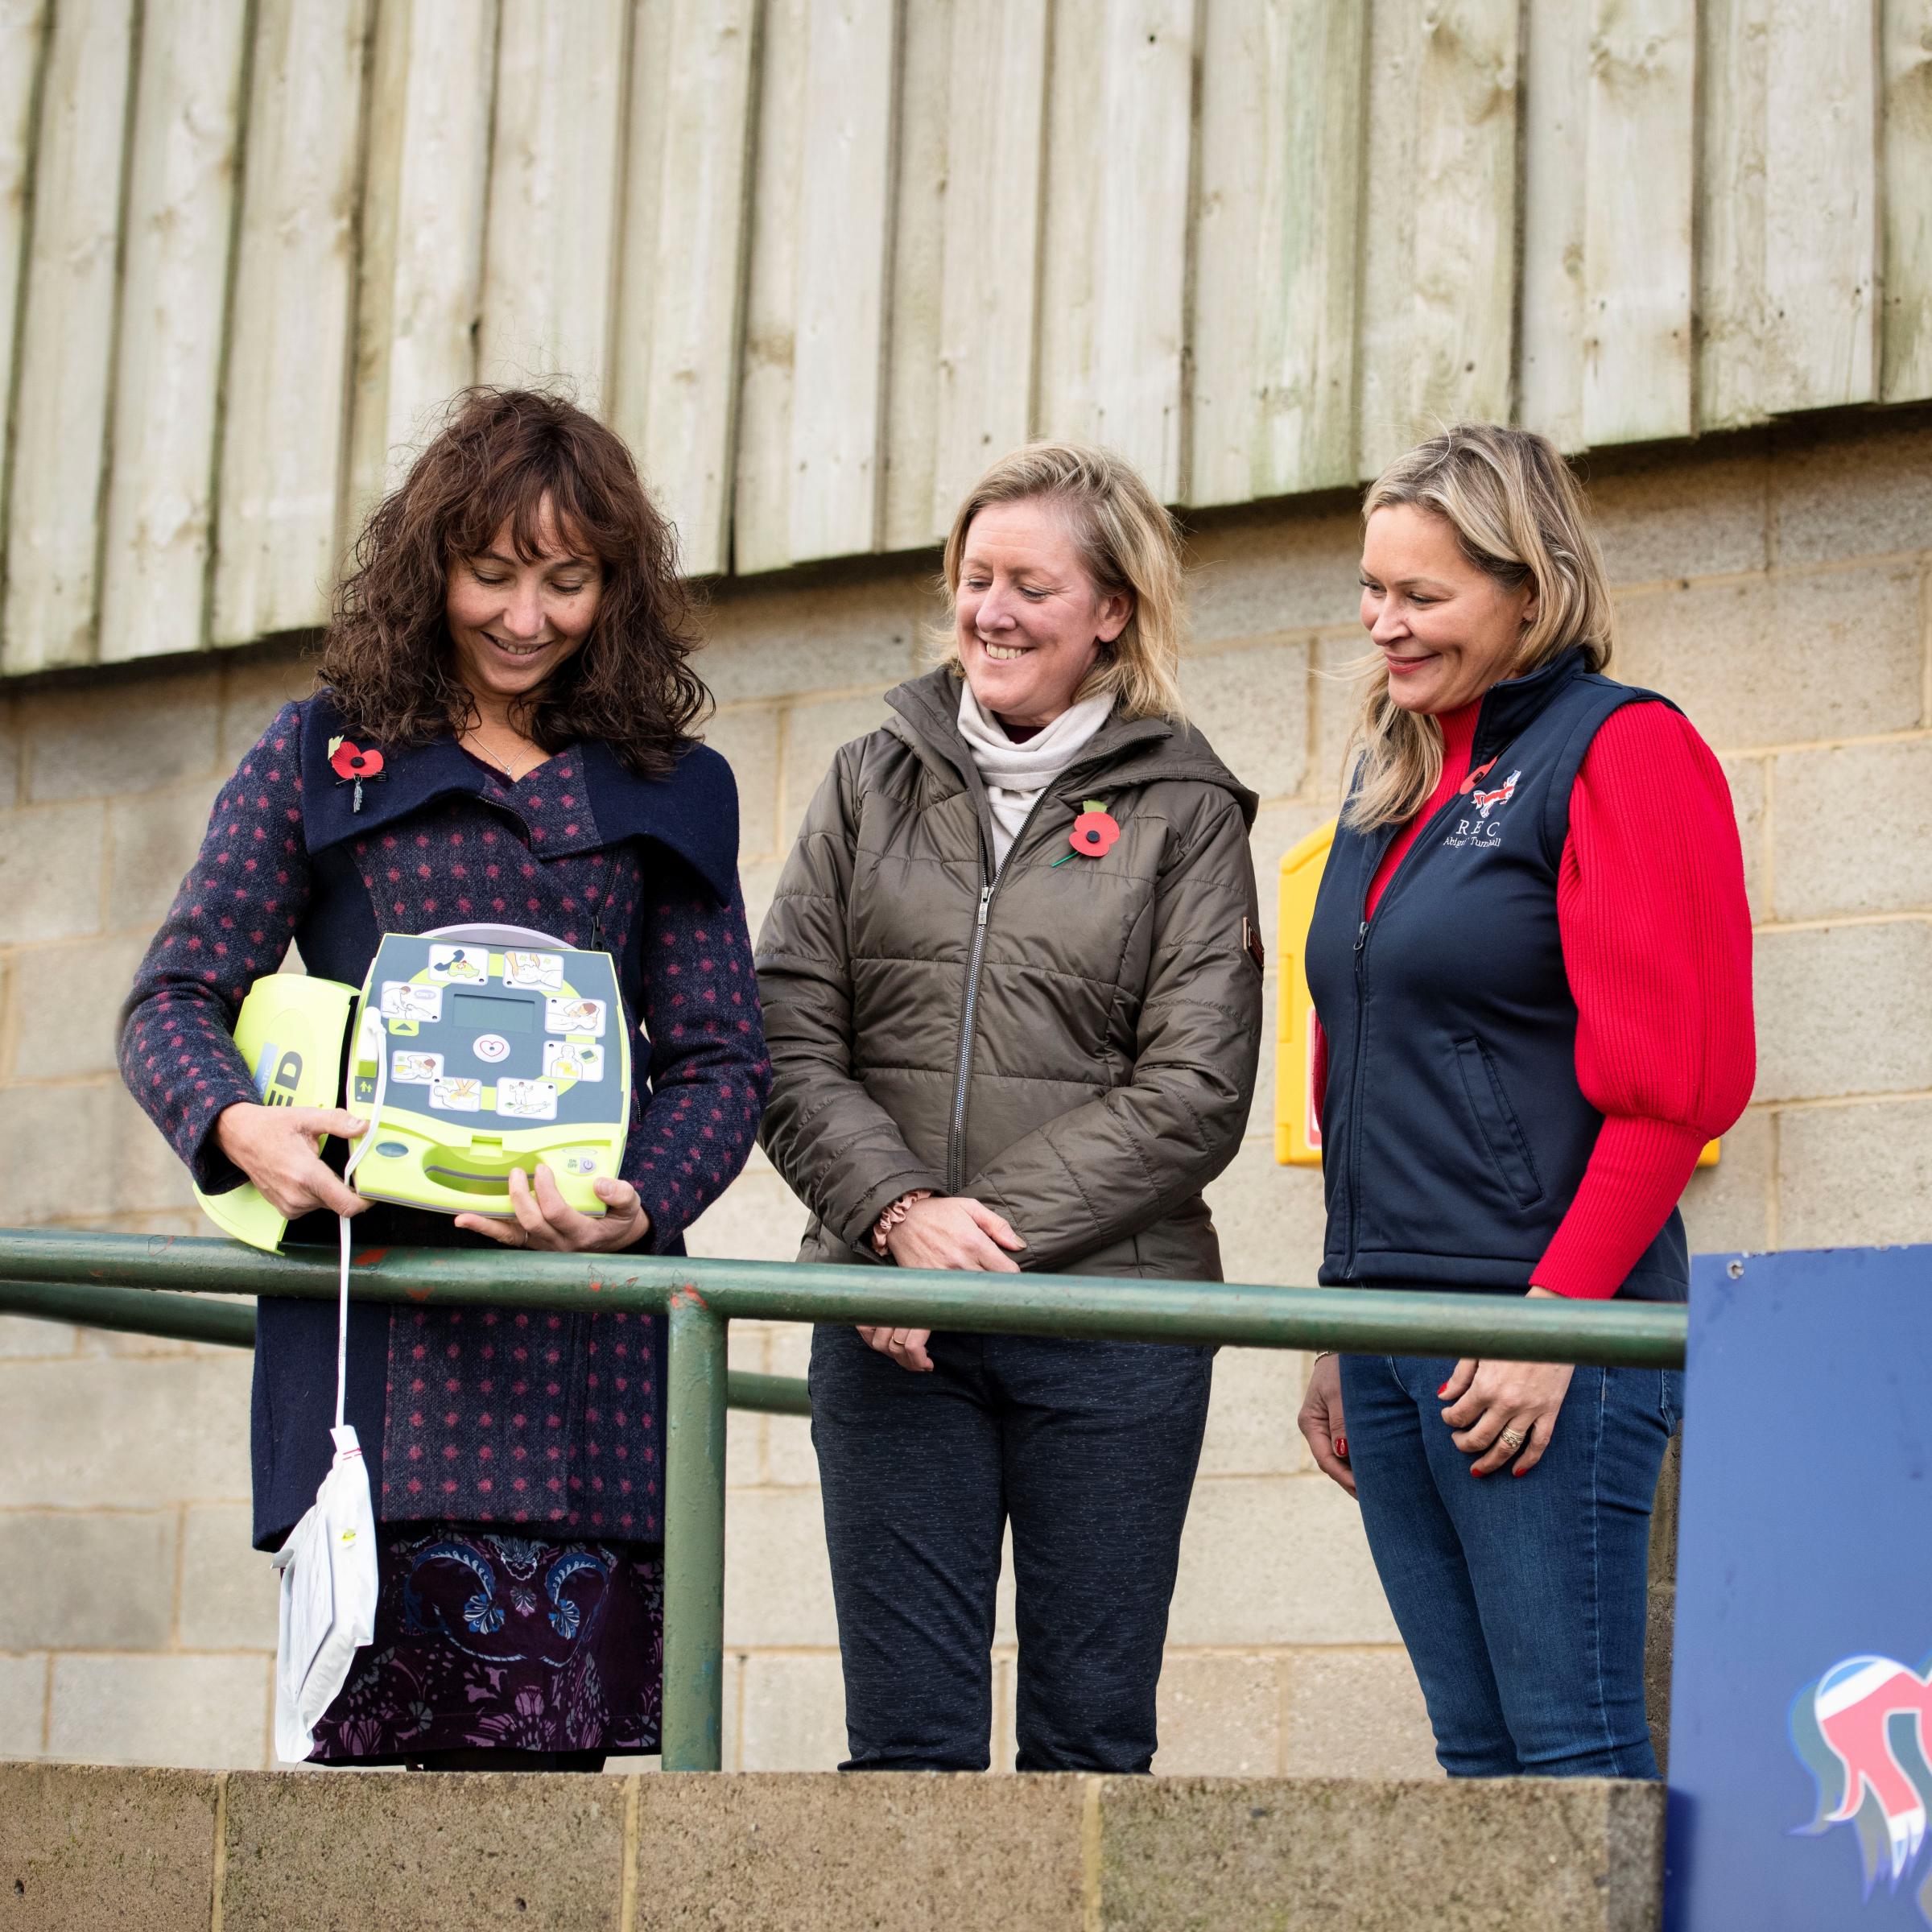 Dr Nicola Schaible, Nicola Wilson and Abigail Turnbull at Richmond Equestrian Centre Picture: TRACY KIDD PHOTOGRAPHY